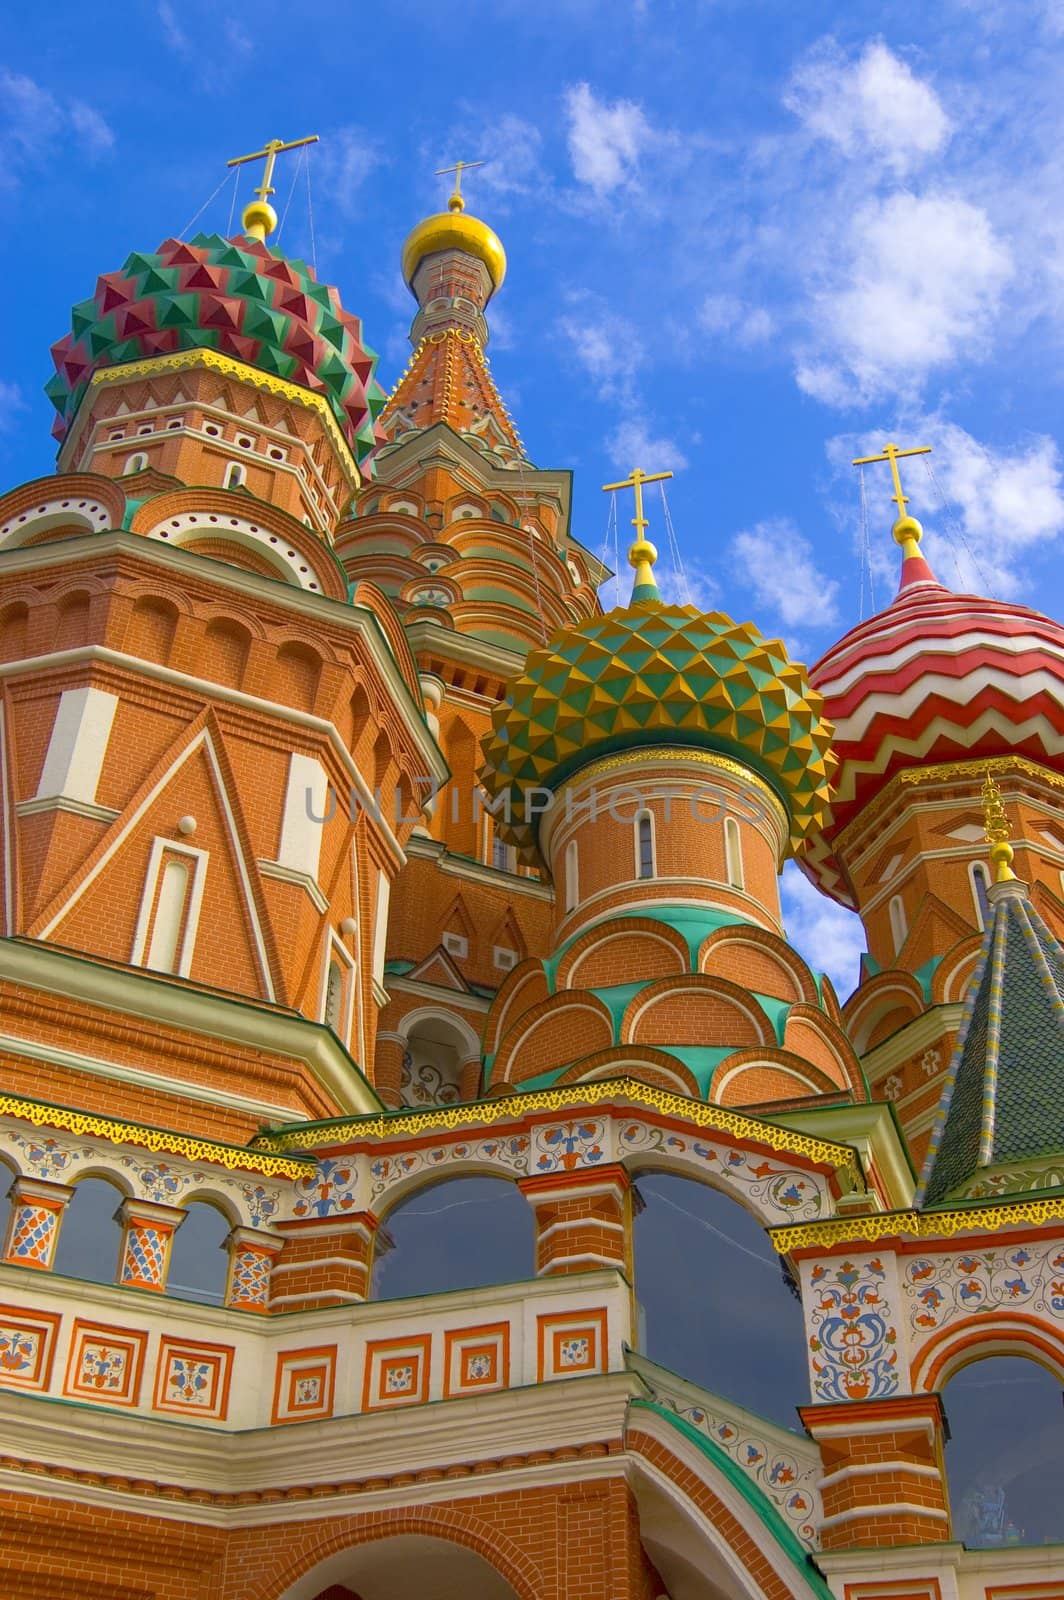 Saint Basil's Cathedral On Red Square In Moscow.
Russia.